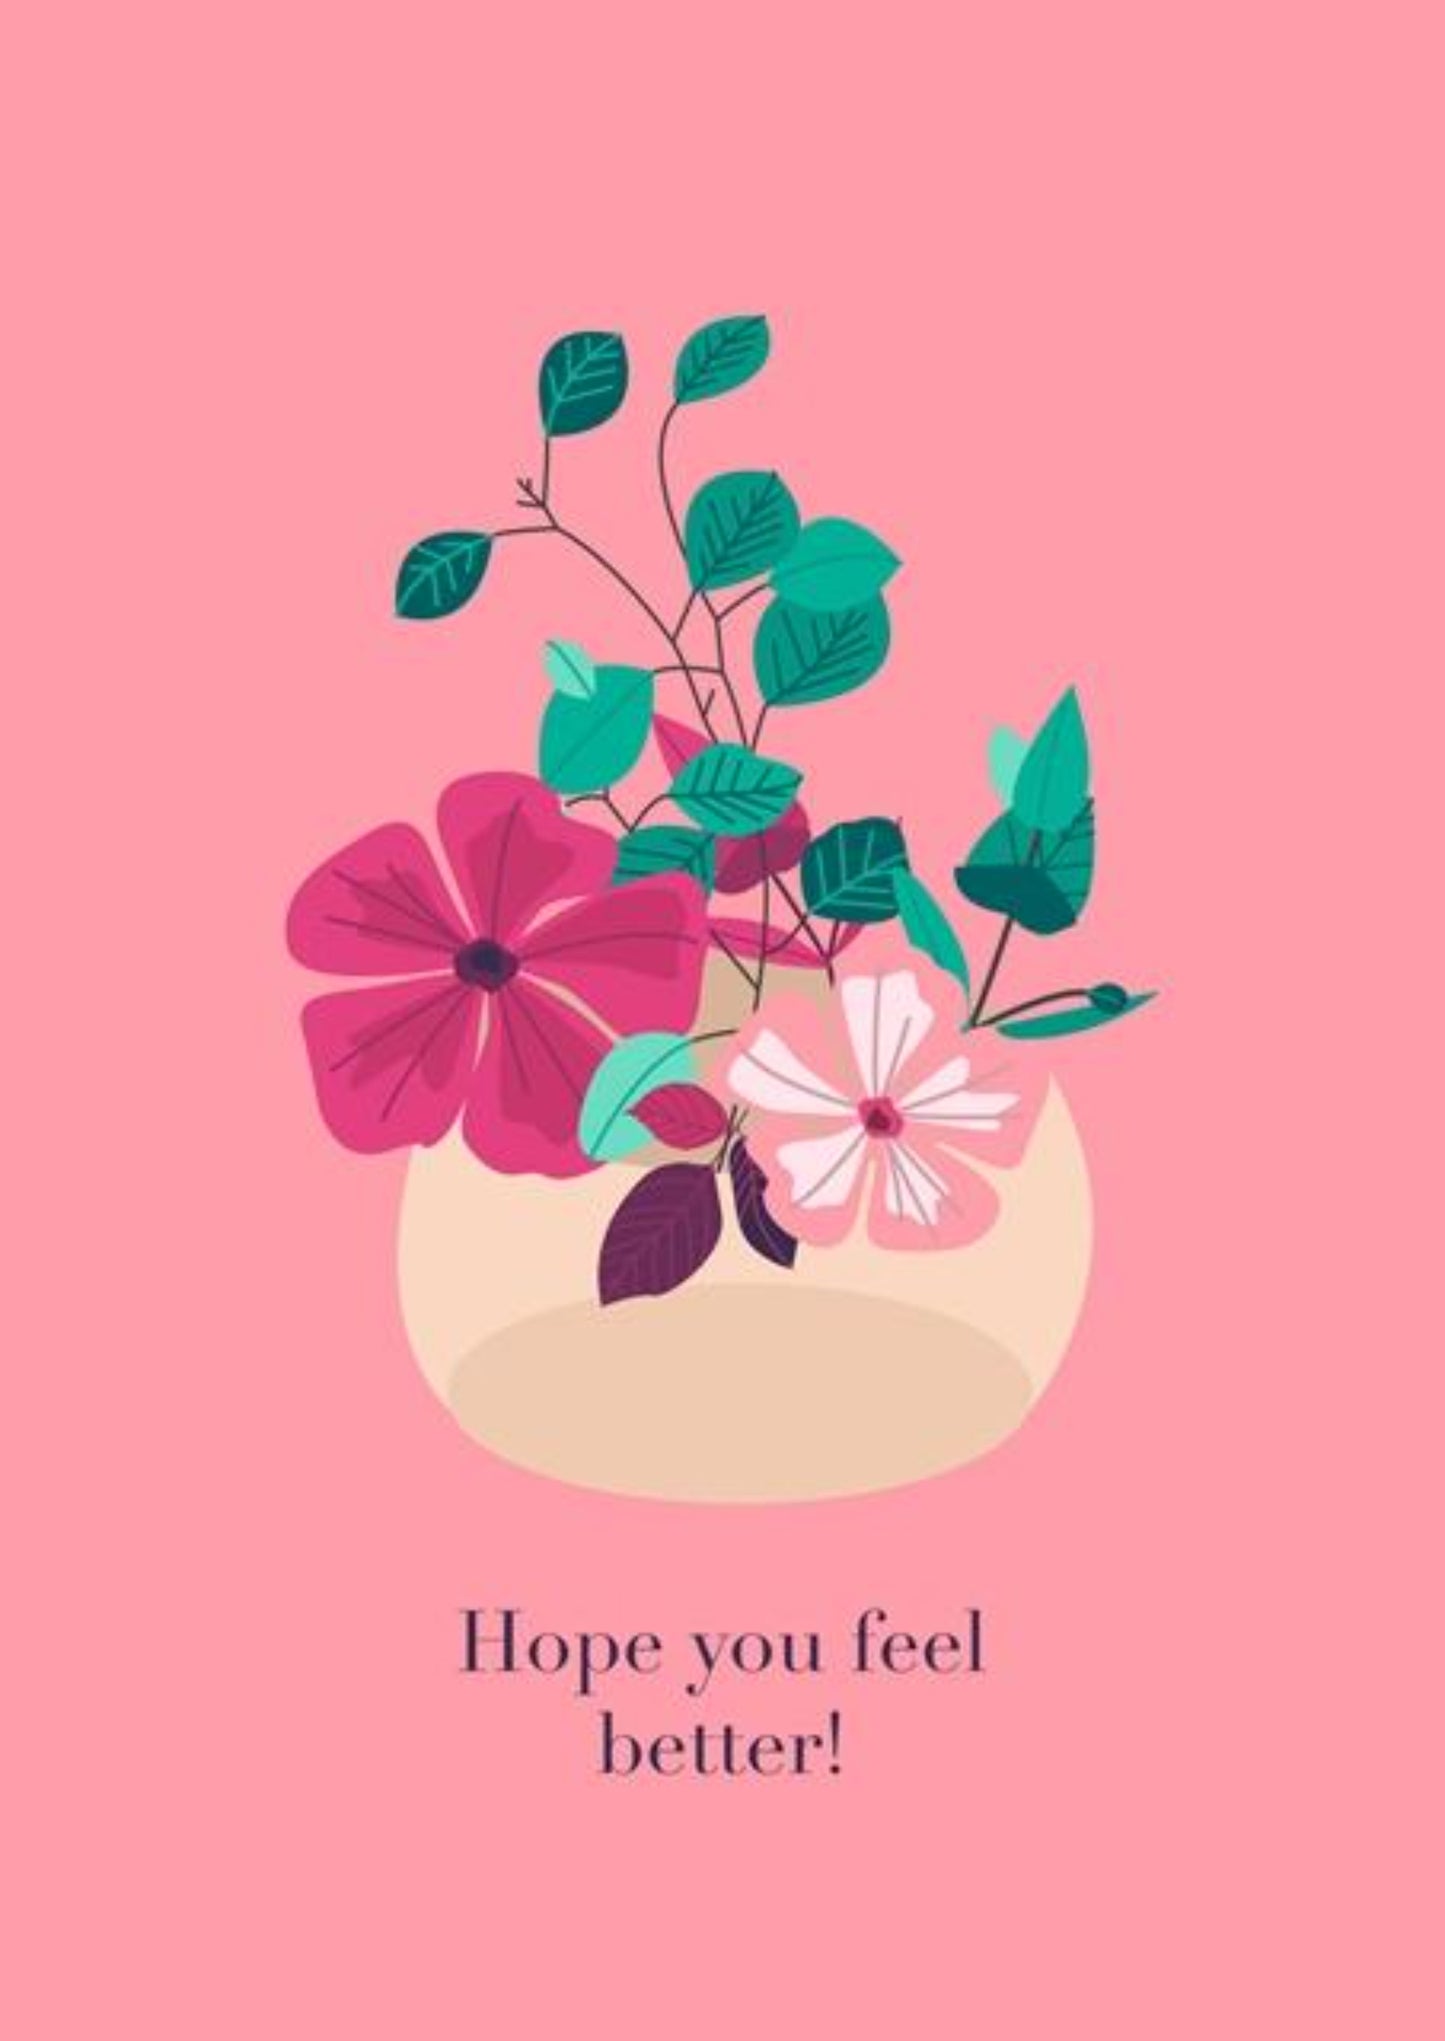 Feel Better Greeting Card - Get Well Soon Greeting Card.